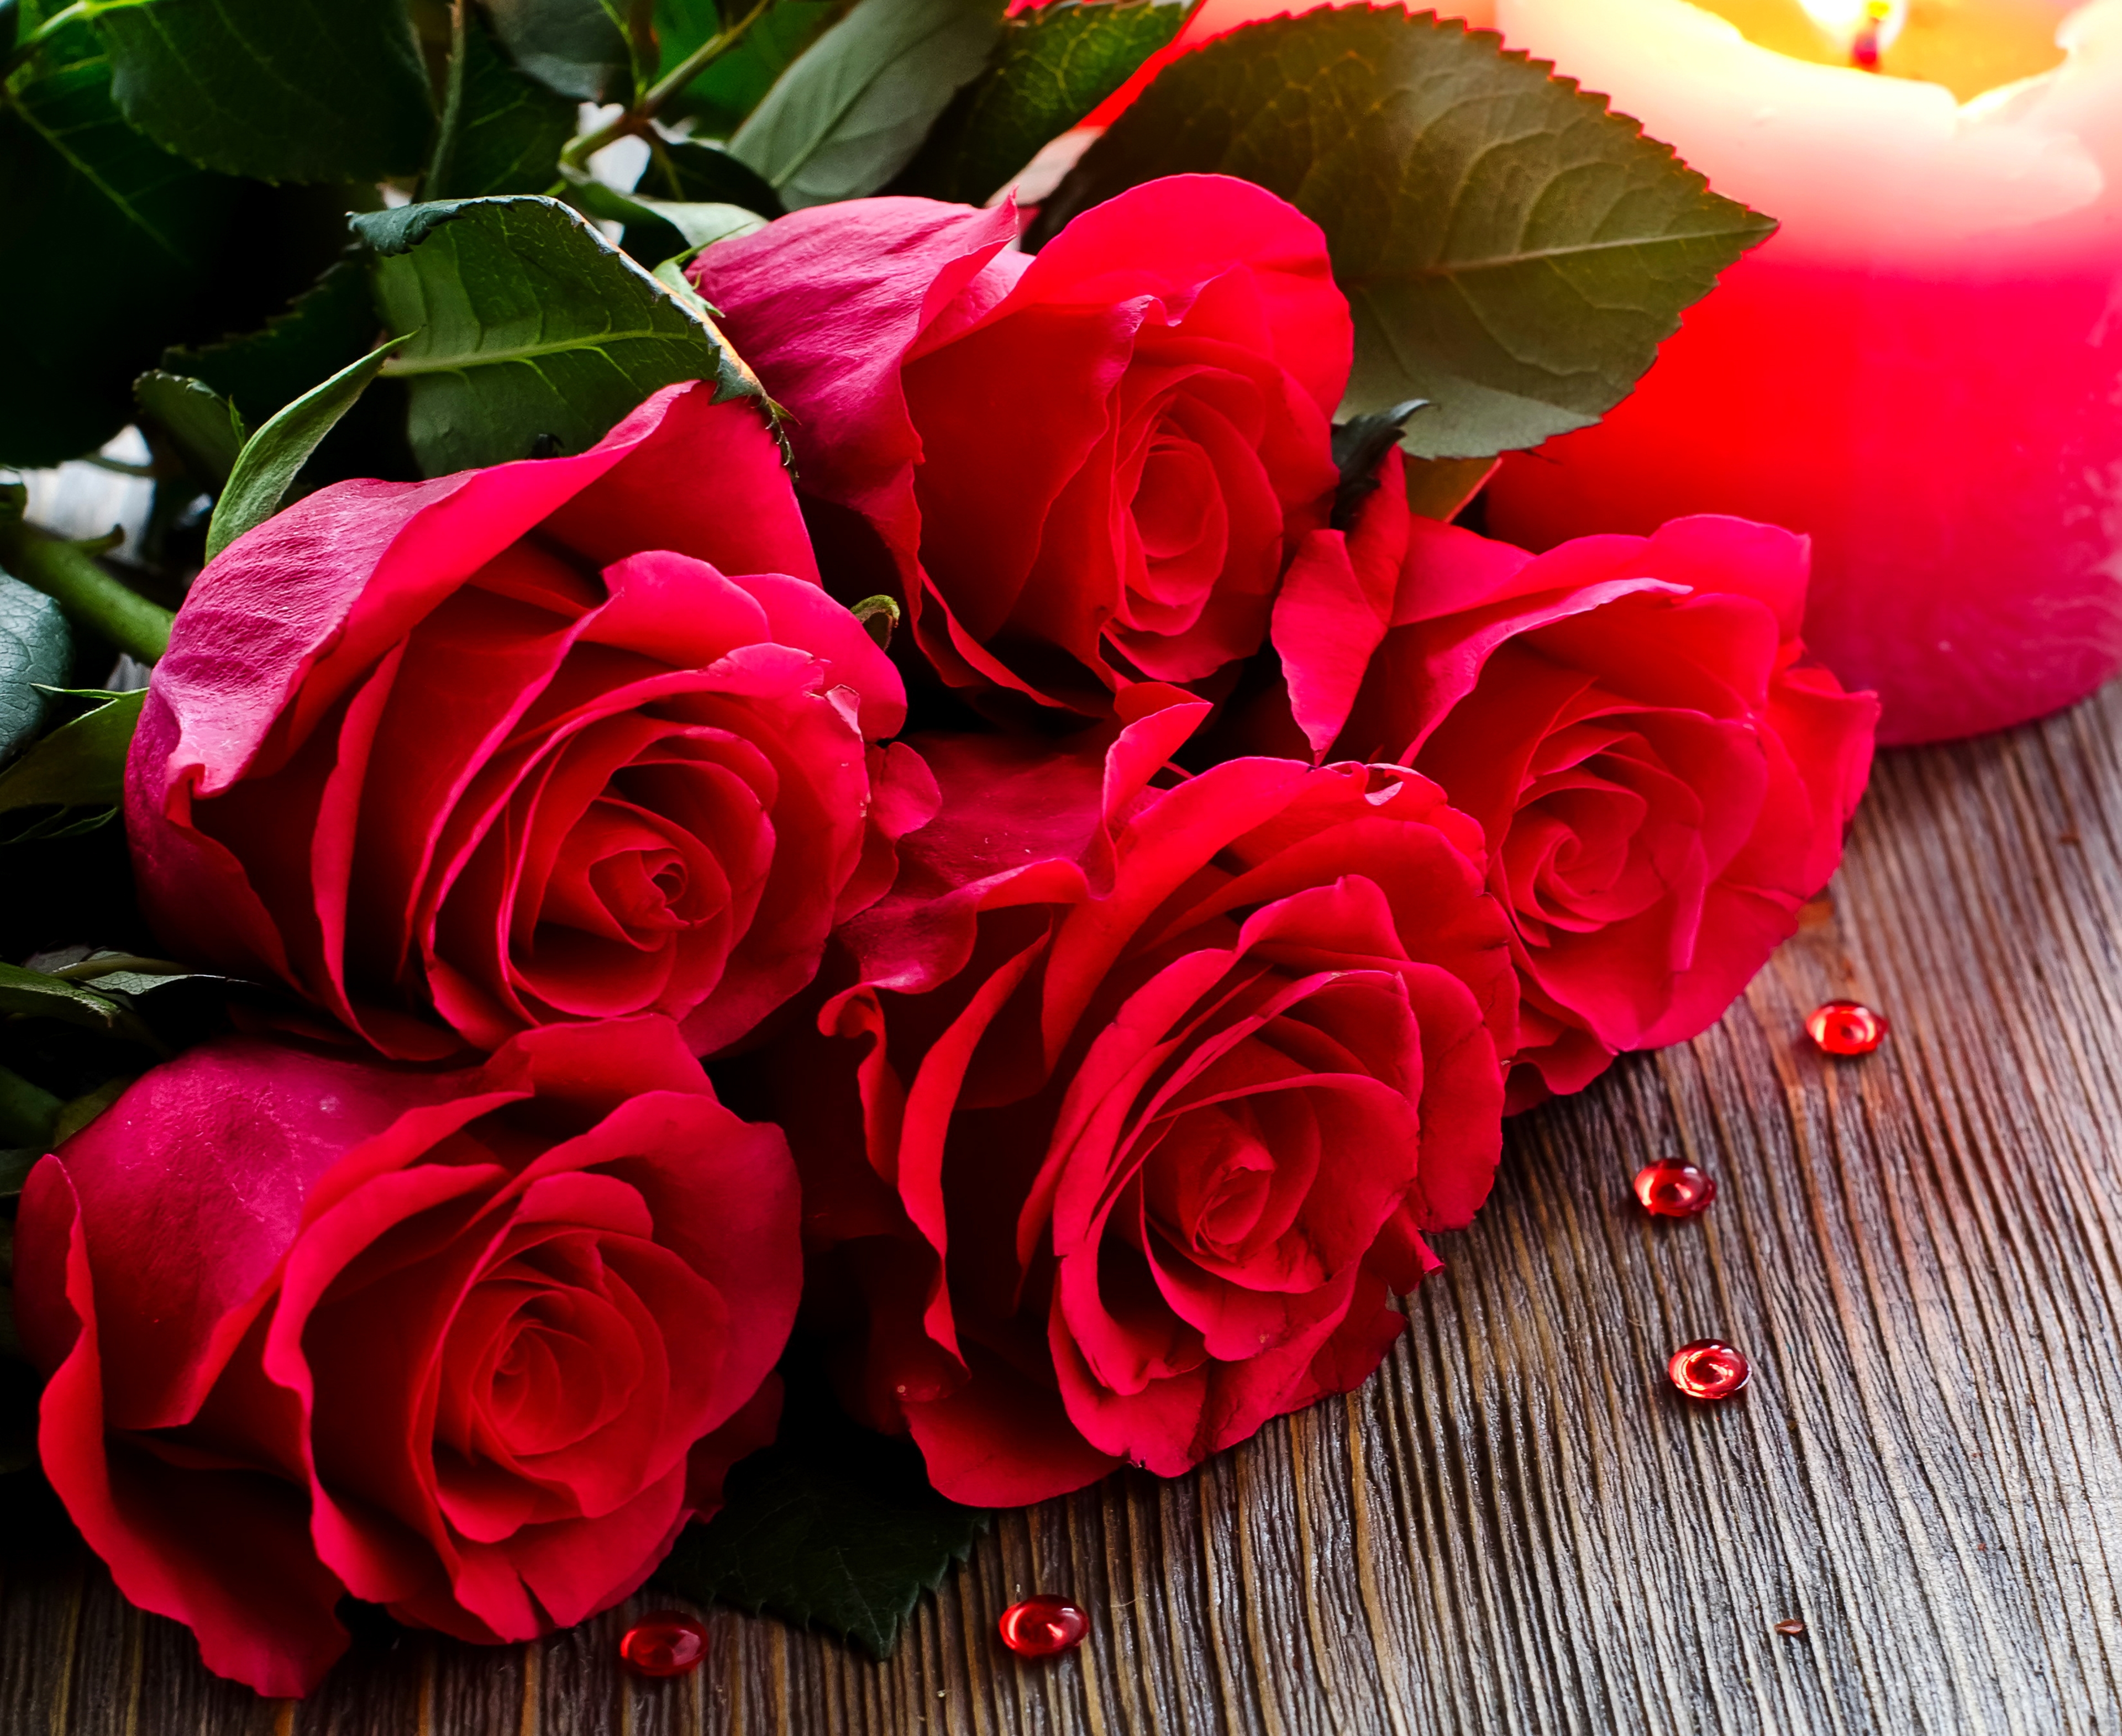 Download PC Wallpaper earth, rose, bouquet, red flower, red rose, flowers